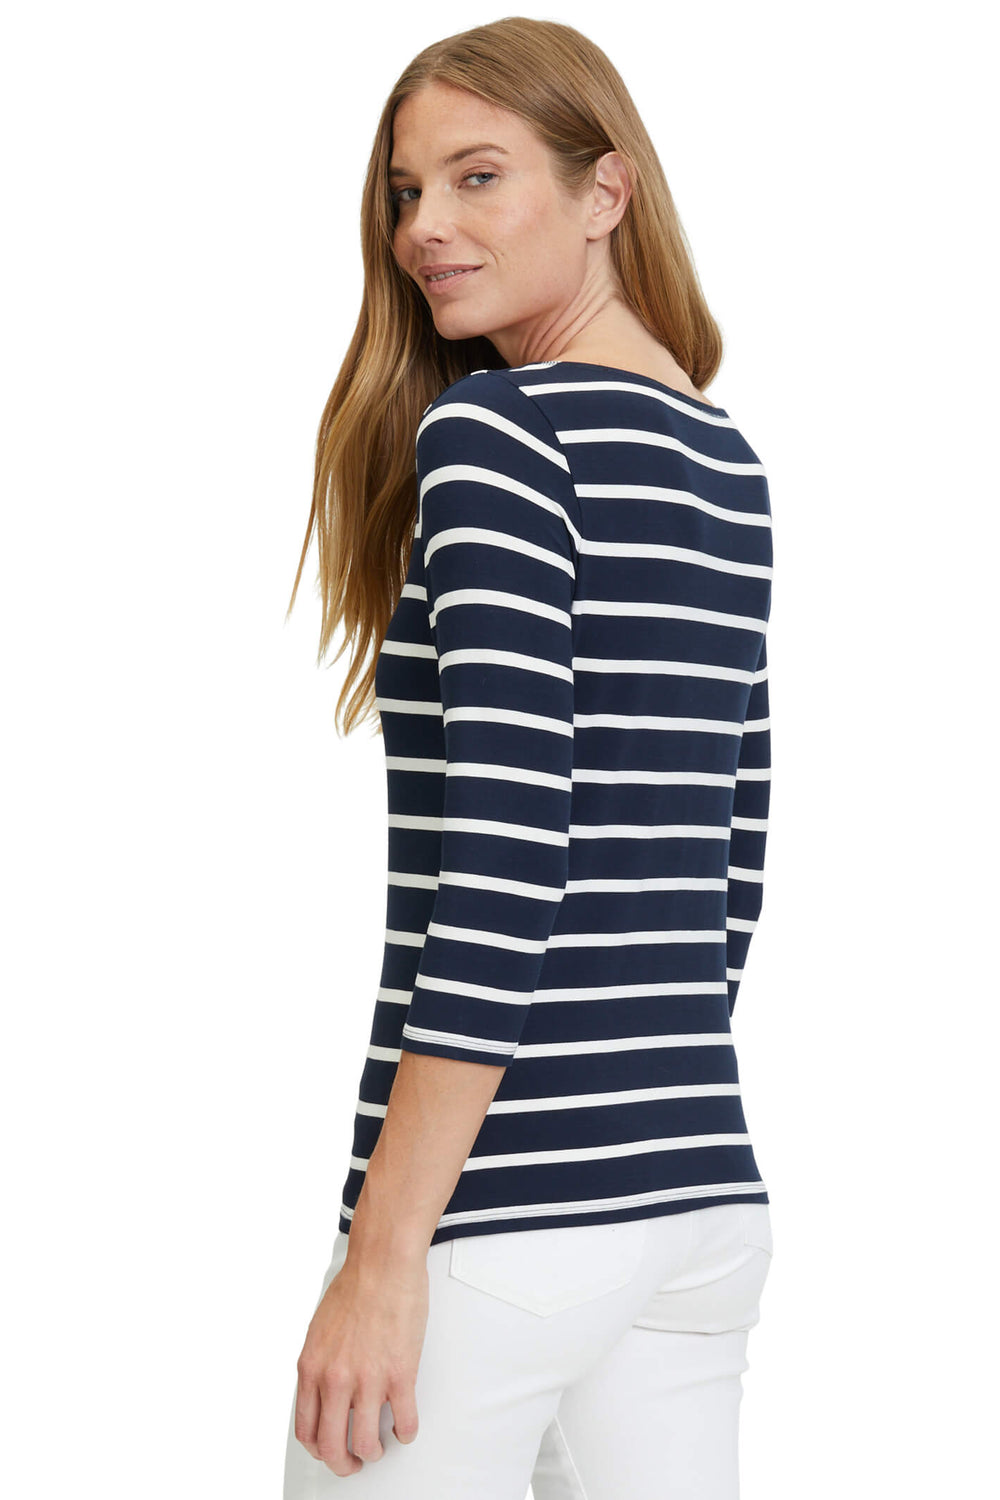 Betty Barclay 2848 2112 8813 Navy Cream Striped Breton Style Top - Dotique Chesterfield